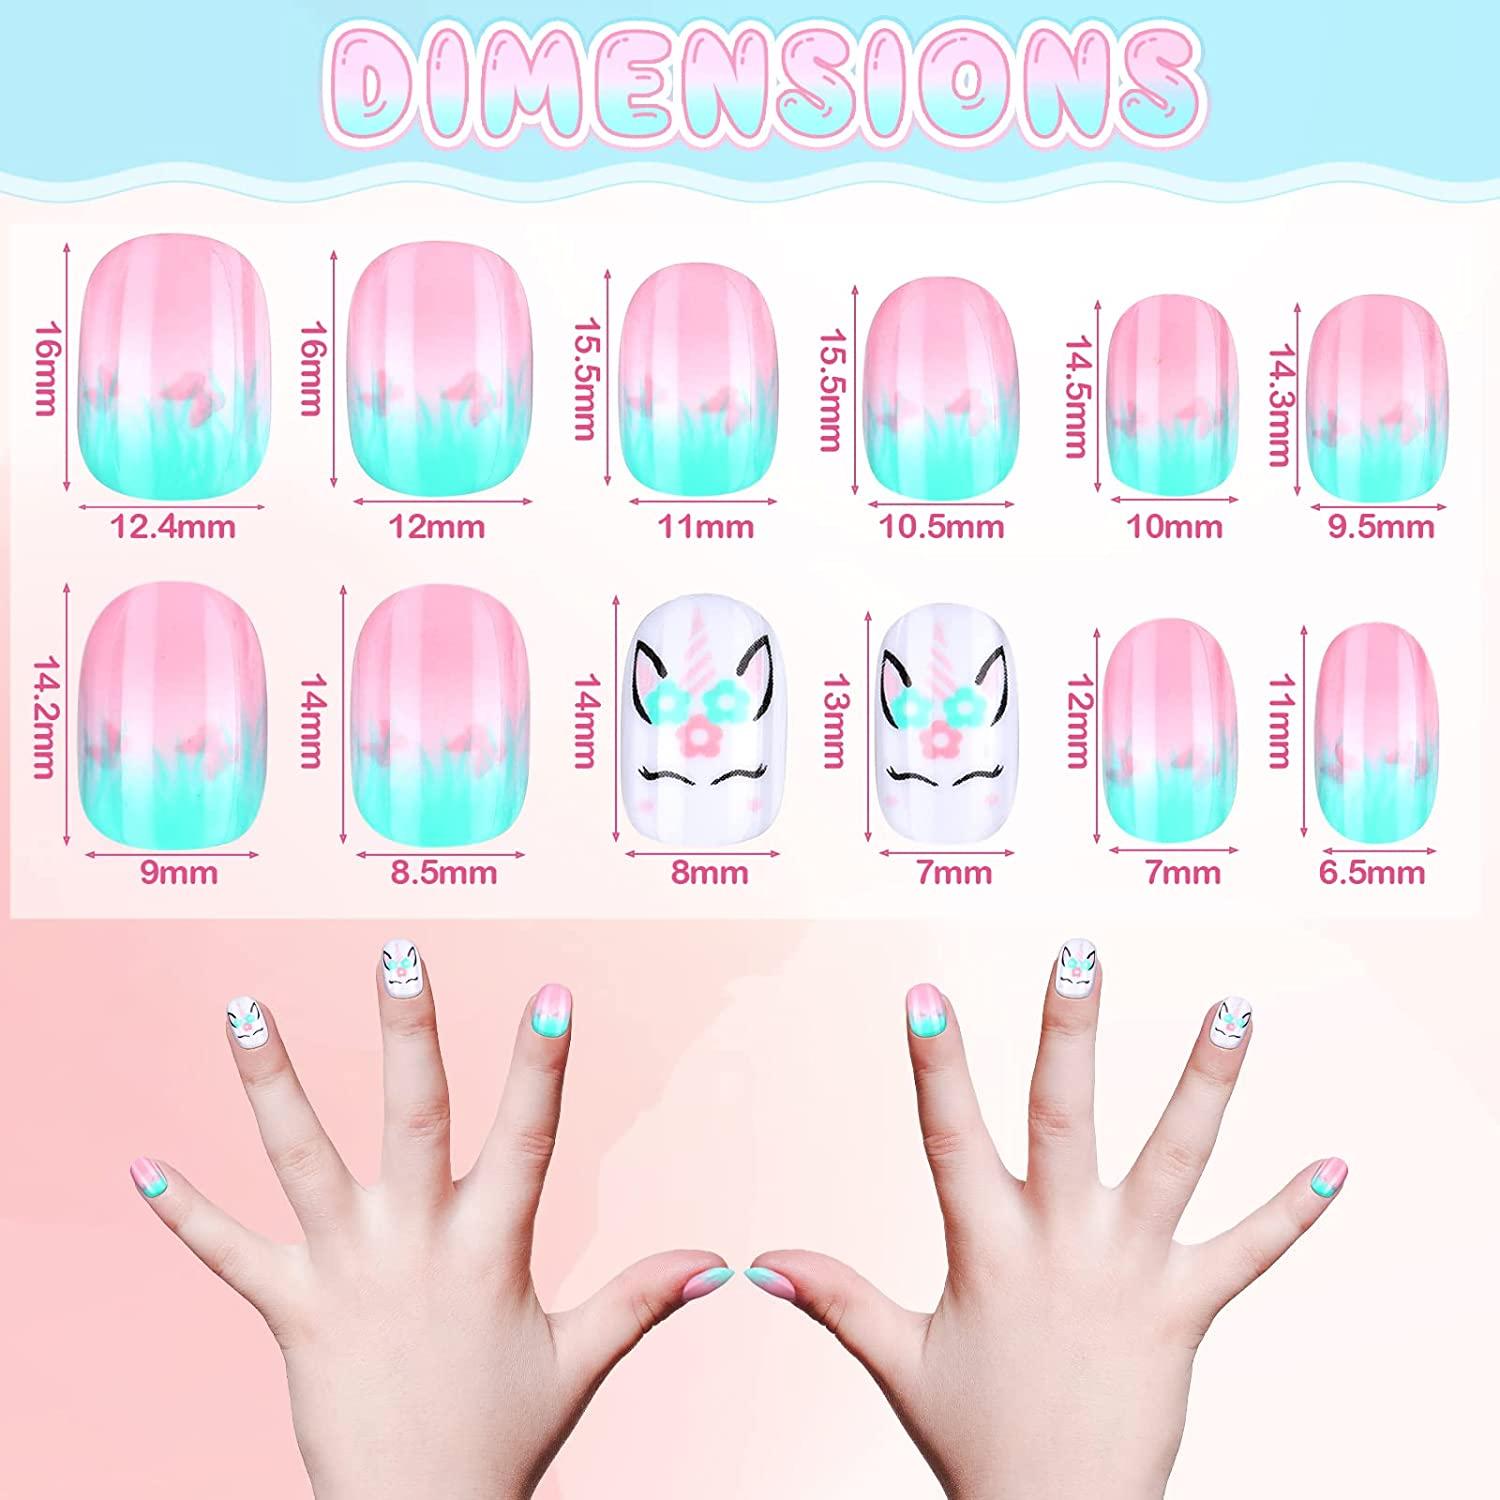  120 Pieces Press on Nails Children Fake Nails